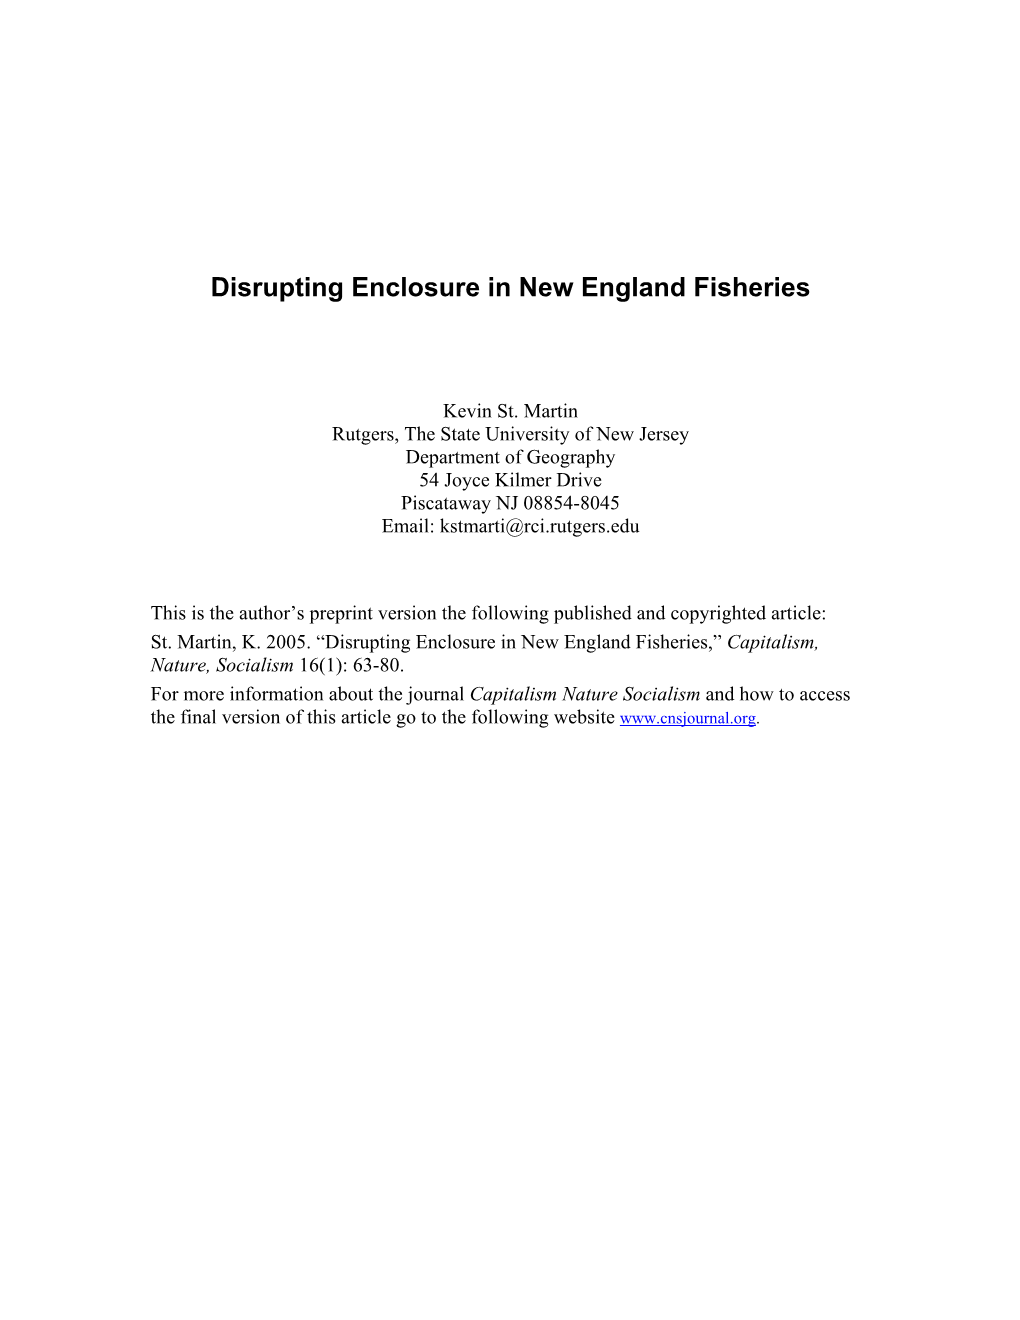 Disrupting Enclosure in New England Fisheries